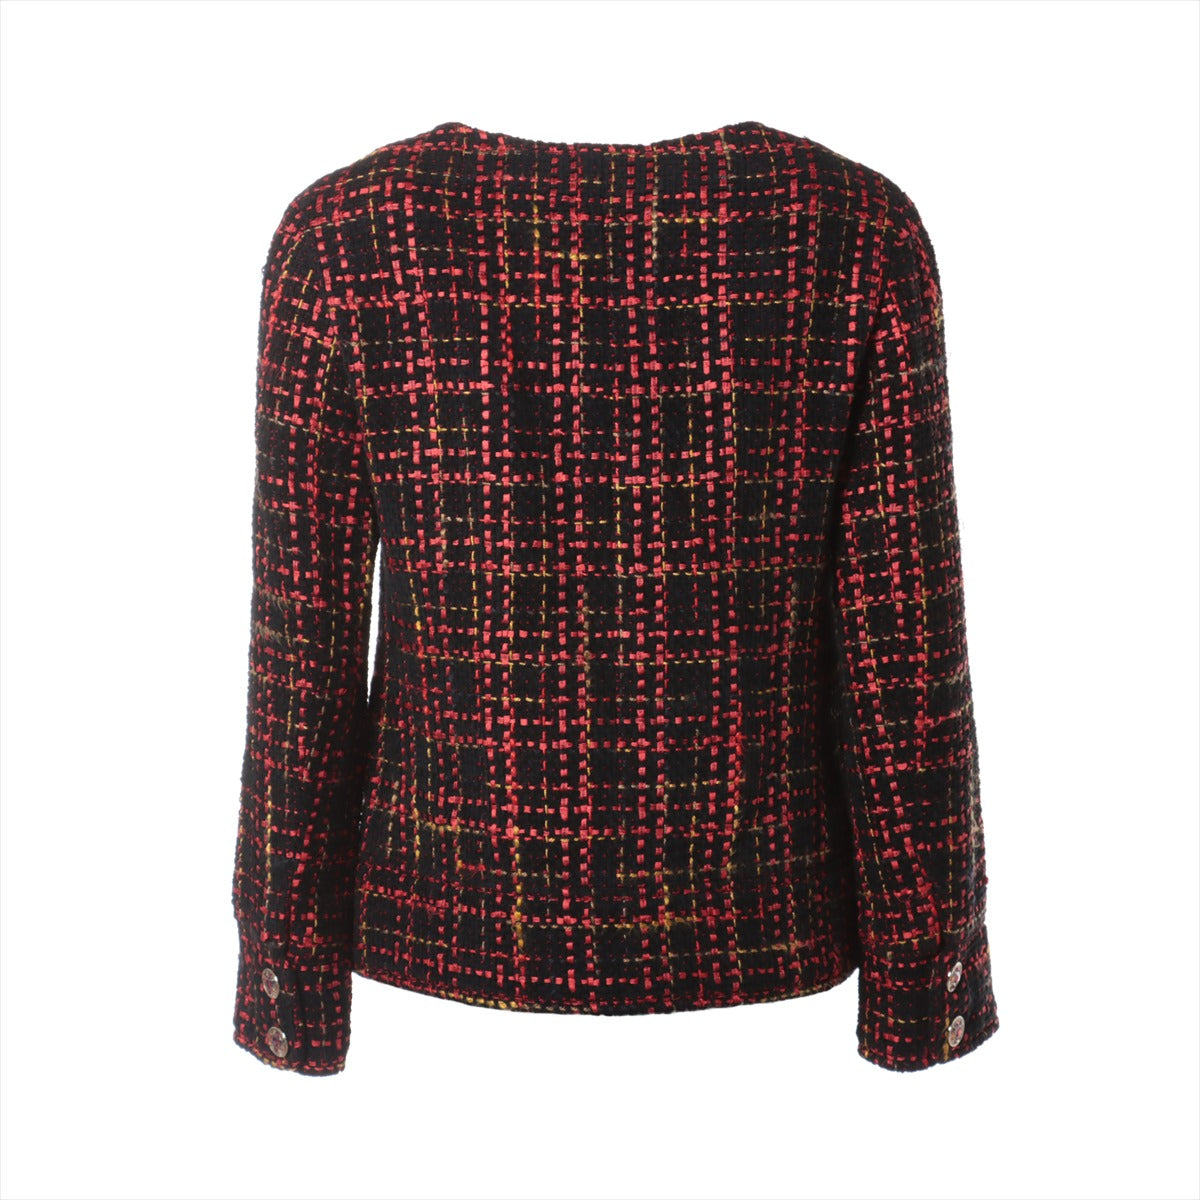 Chanel Coco Button P73 Tweed Jacket 36 Ladies' Red x Black